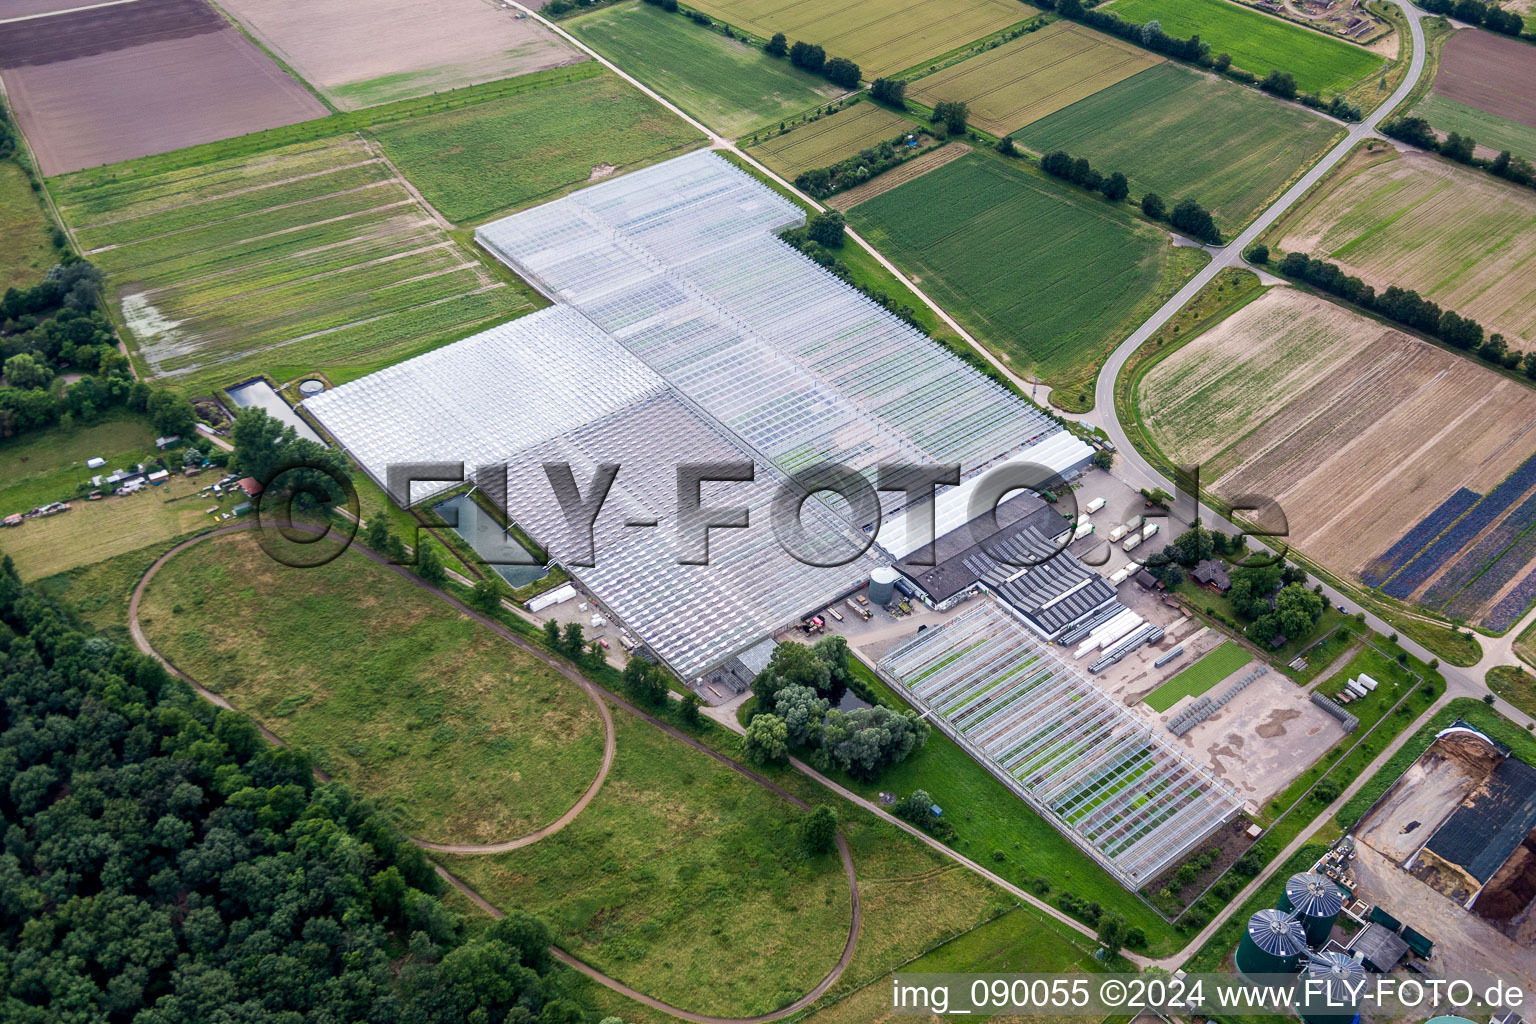 Glass roof surfaces in the greenhouse for vegetable growing ranks of Rudolf Sinn Jungpflanzen GmbH & Co. KG in Lustadt in the state Rhineland-Palatinate, Germany